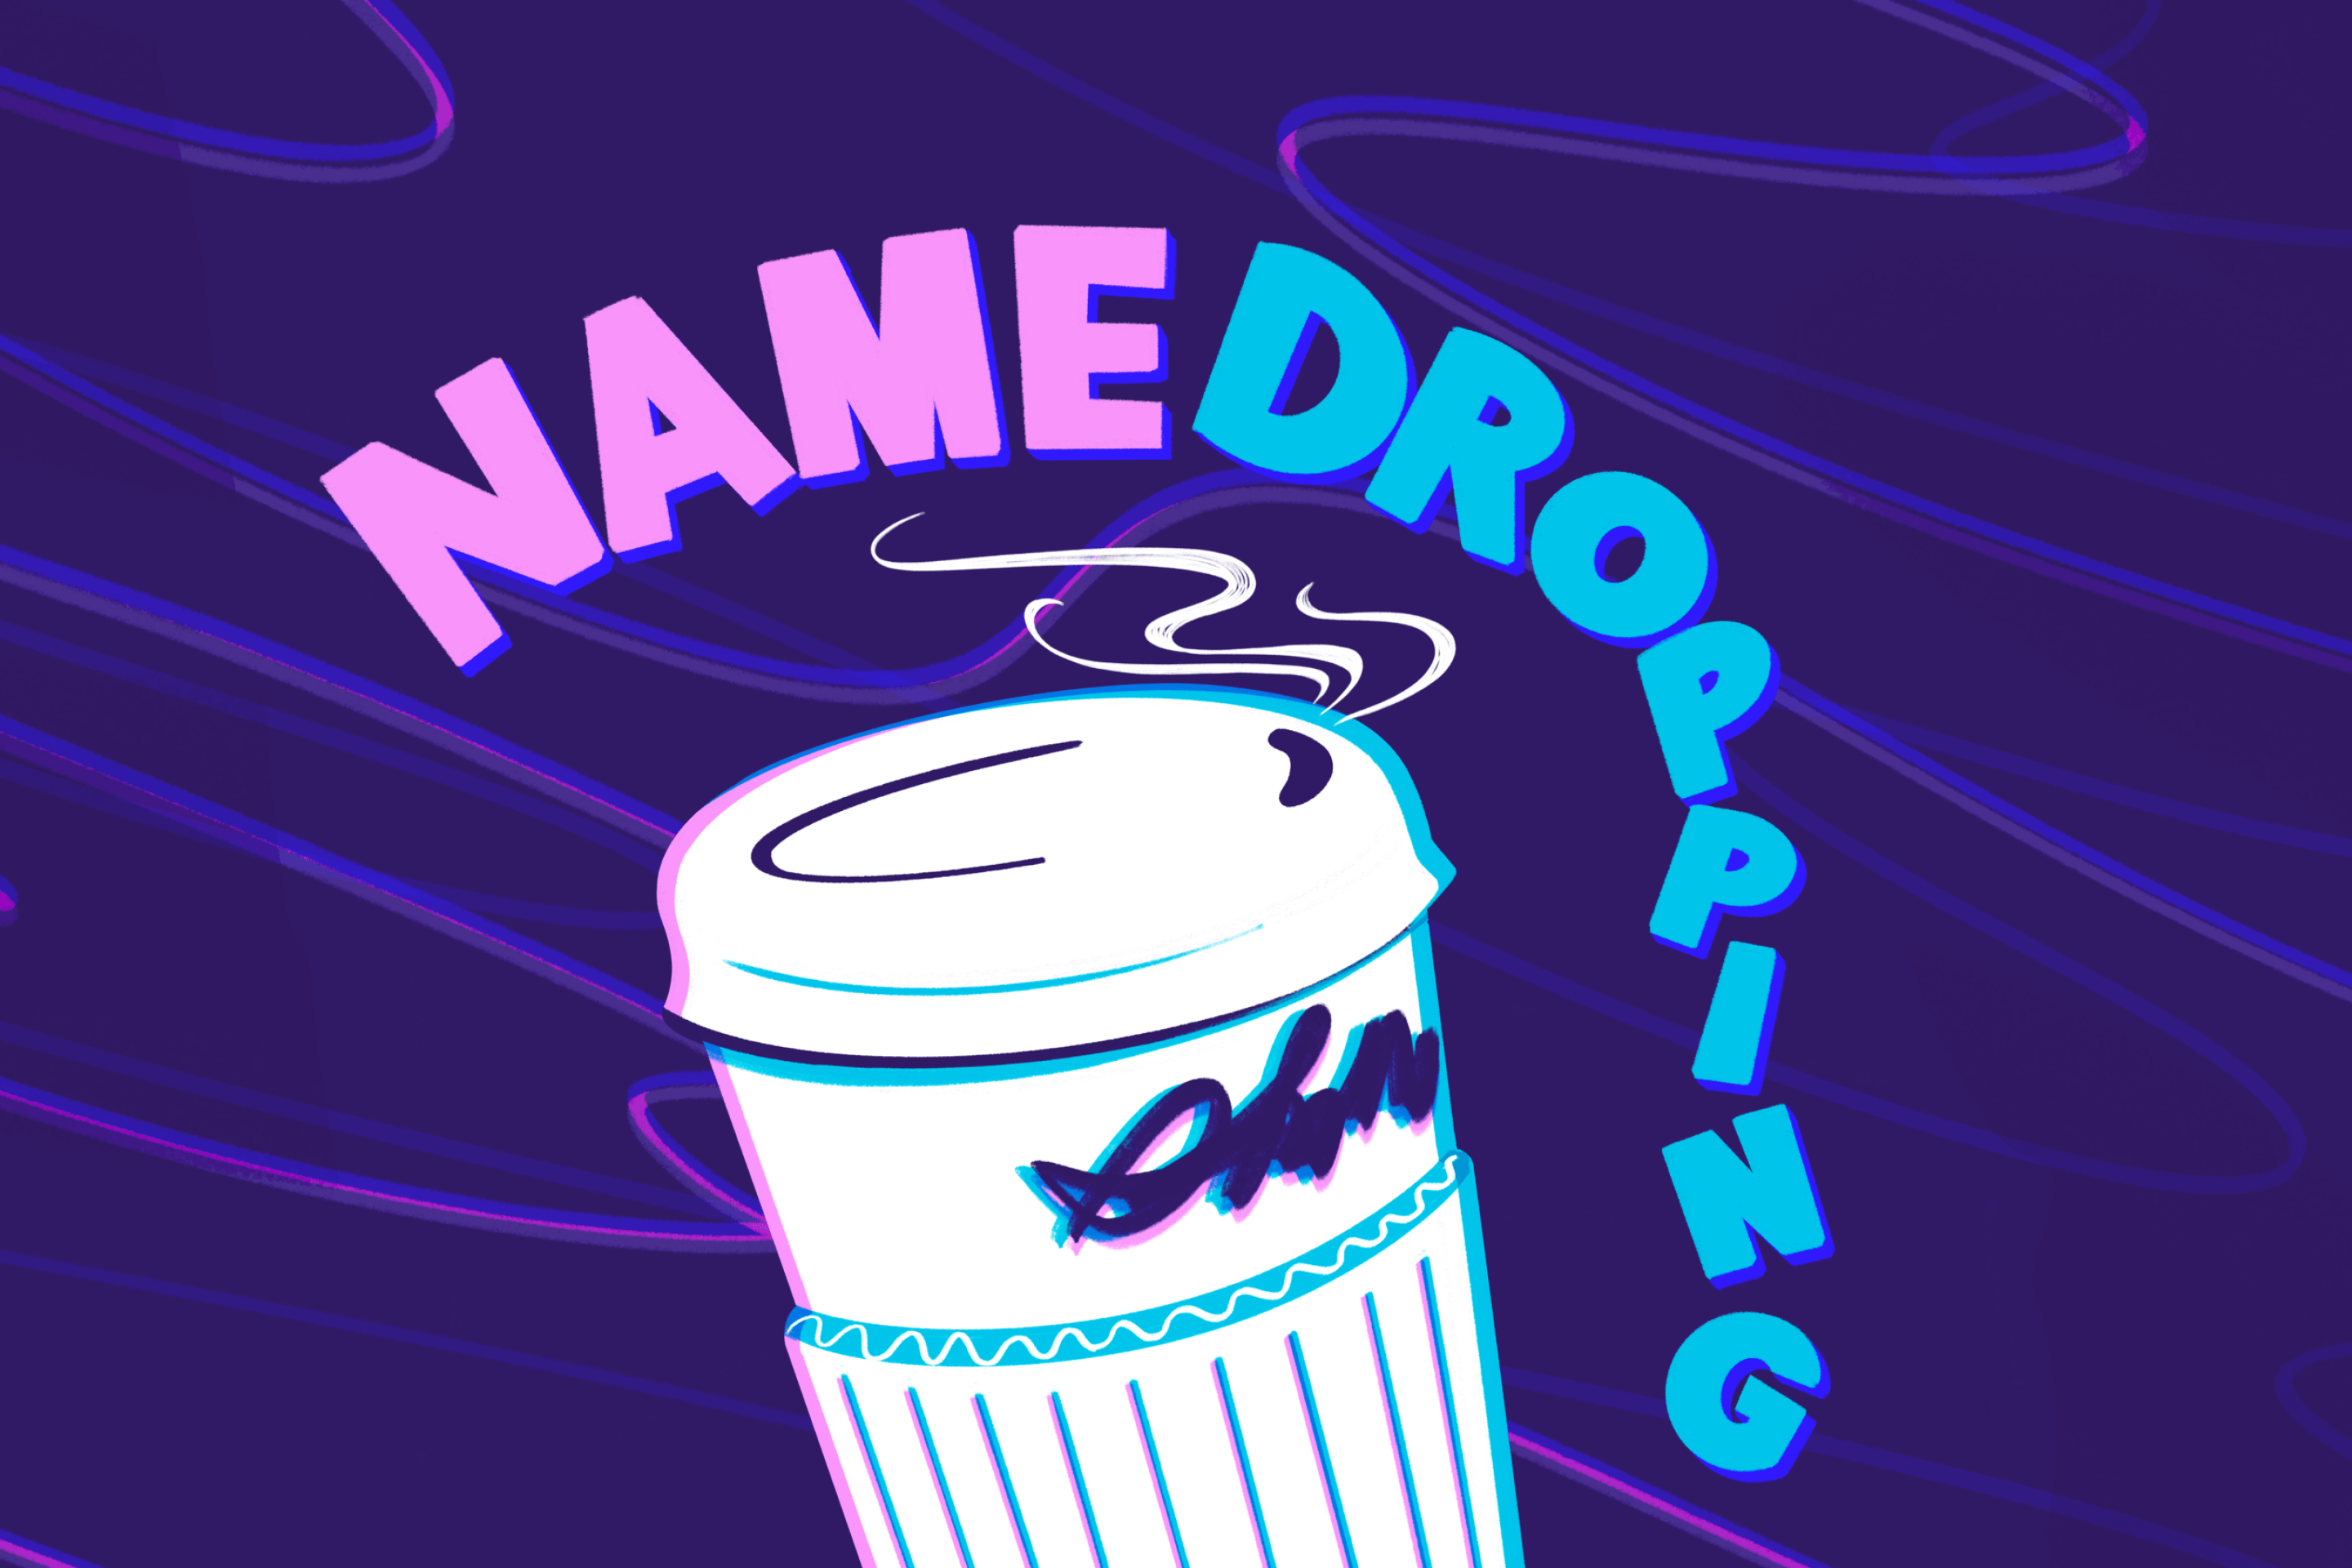 The Namedropping podcast logo, a coffee cup with a scratched-out name